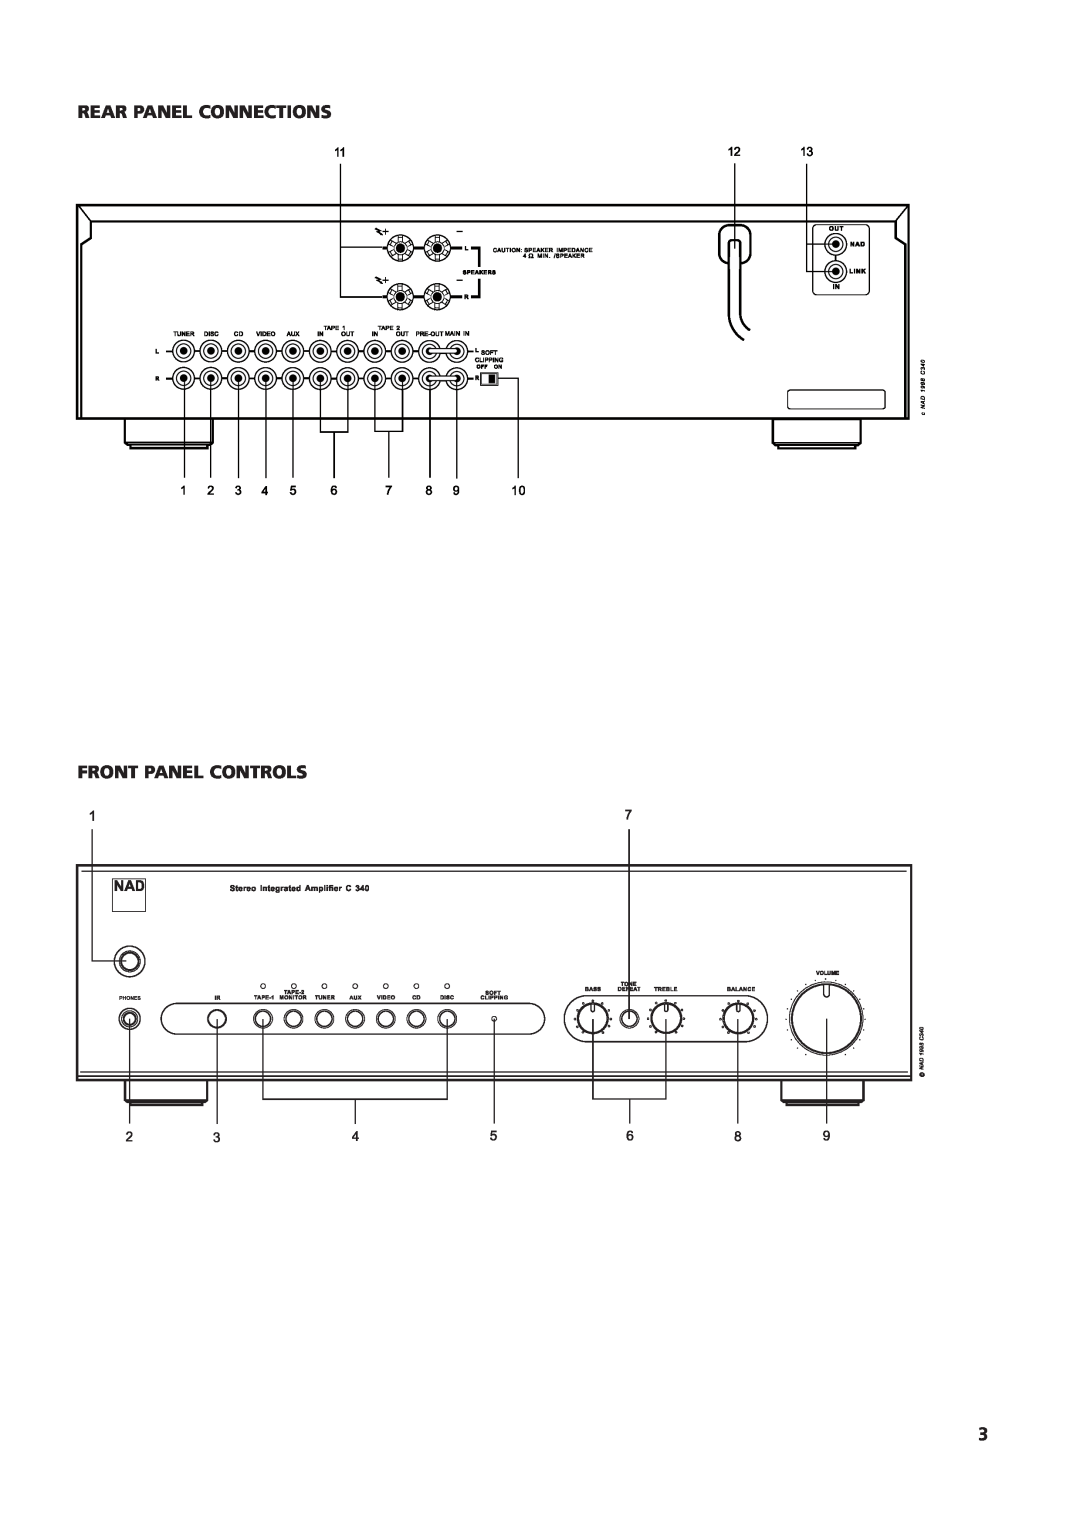 NAD C340 owner manual Rear Panel Connections, Front Panel Controls 